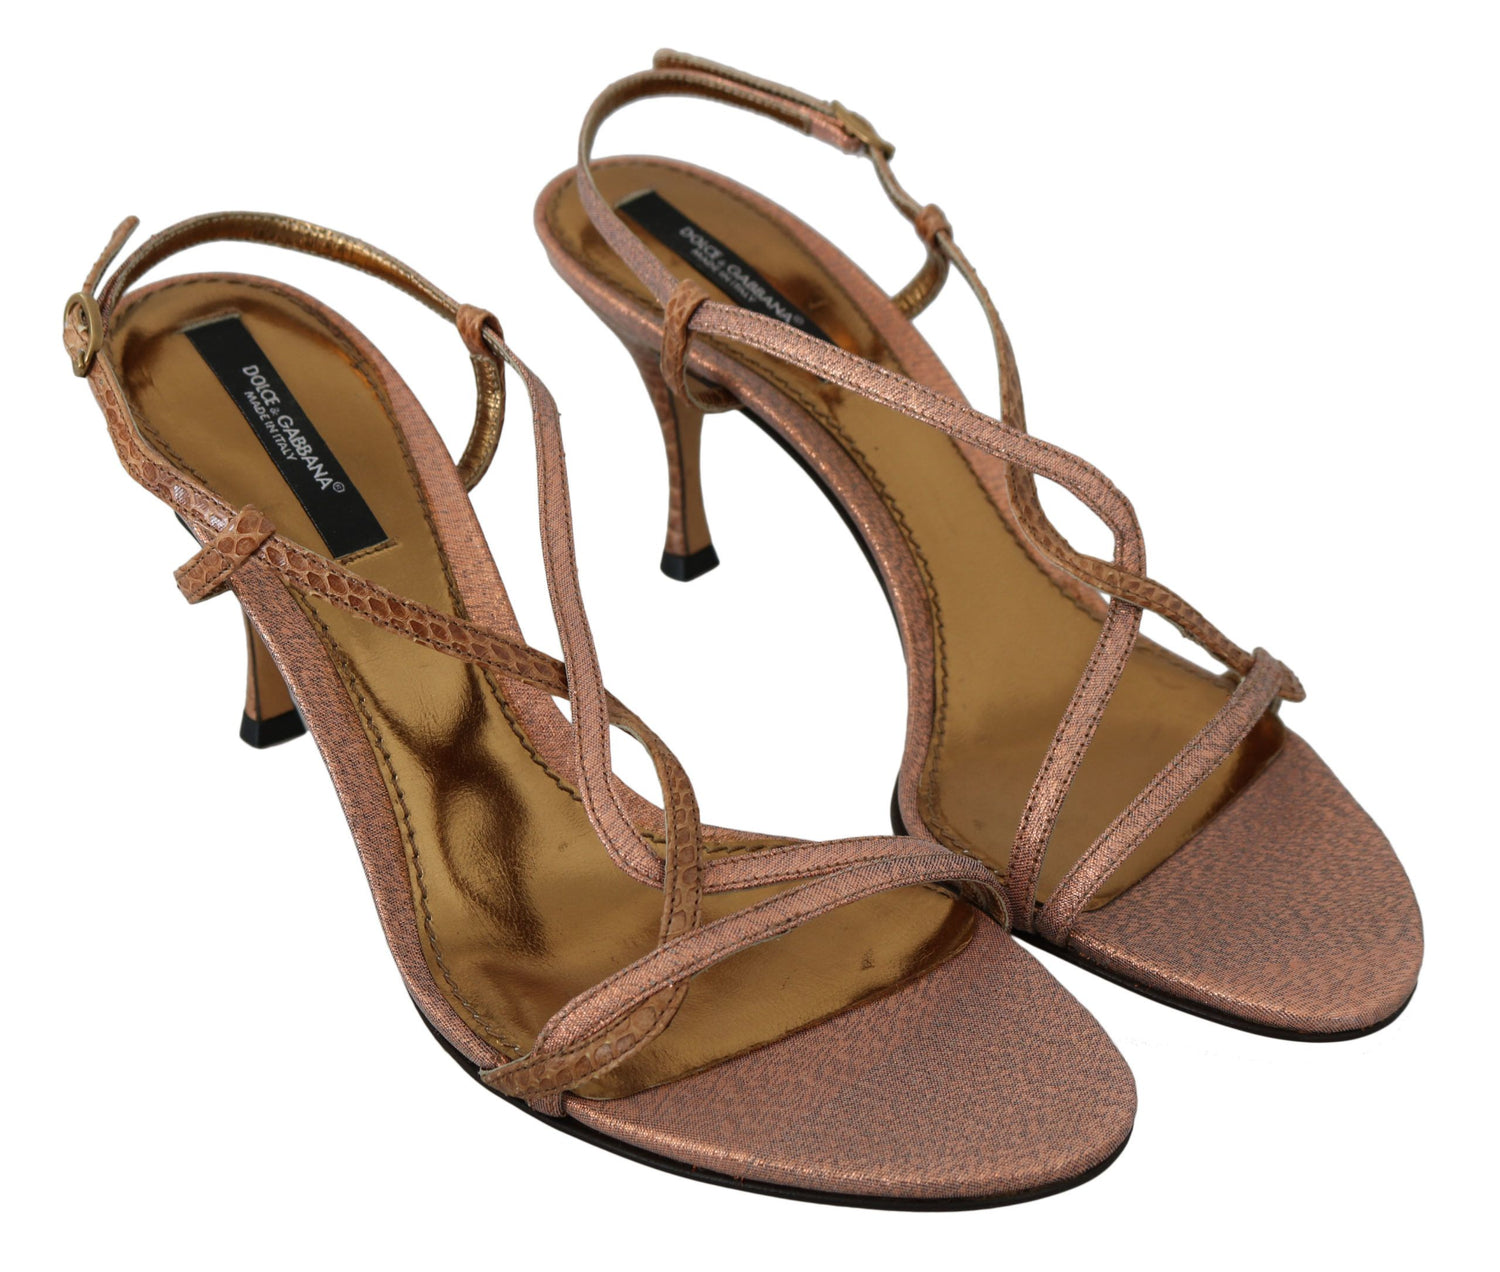 Dolce & Gabbana Chic Ankle Strap Sandals in Pink and Brown - DEA STILOSA MILANO